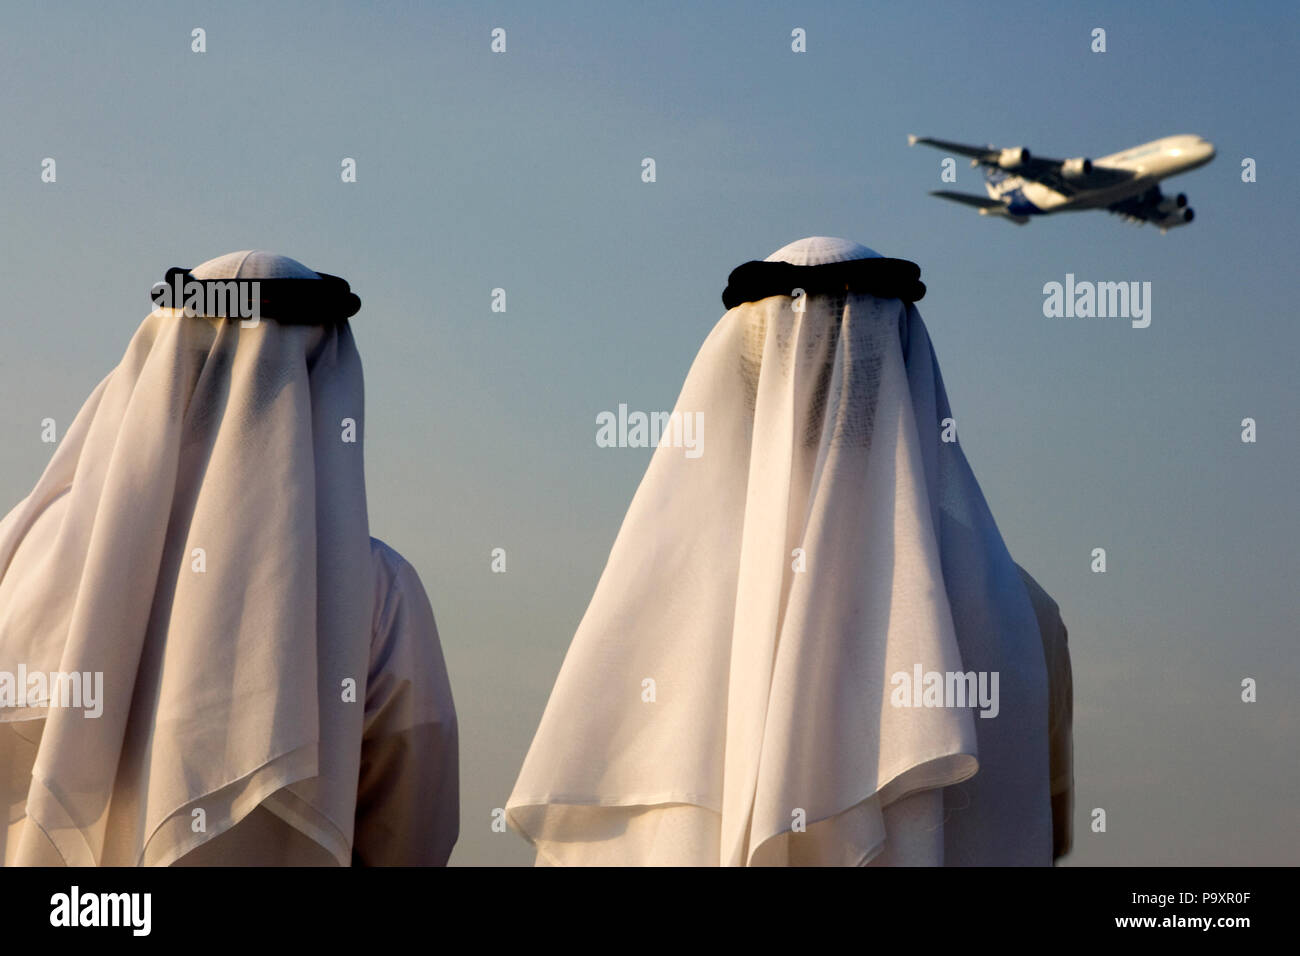 Visitors of Dubai Airshow-2009 watch the Airbus A380 civil jet aircraft, performing its demonstration flight over Dubai, UAE Stock Photo